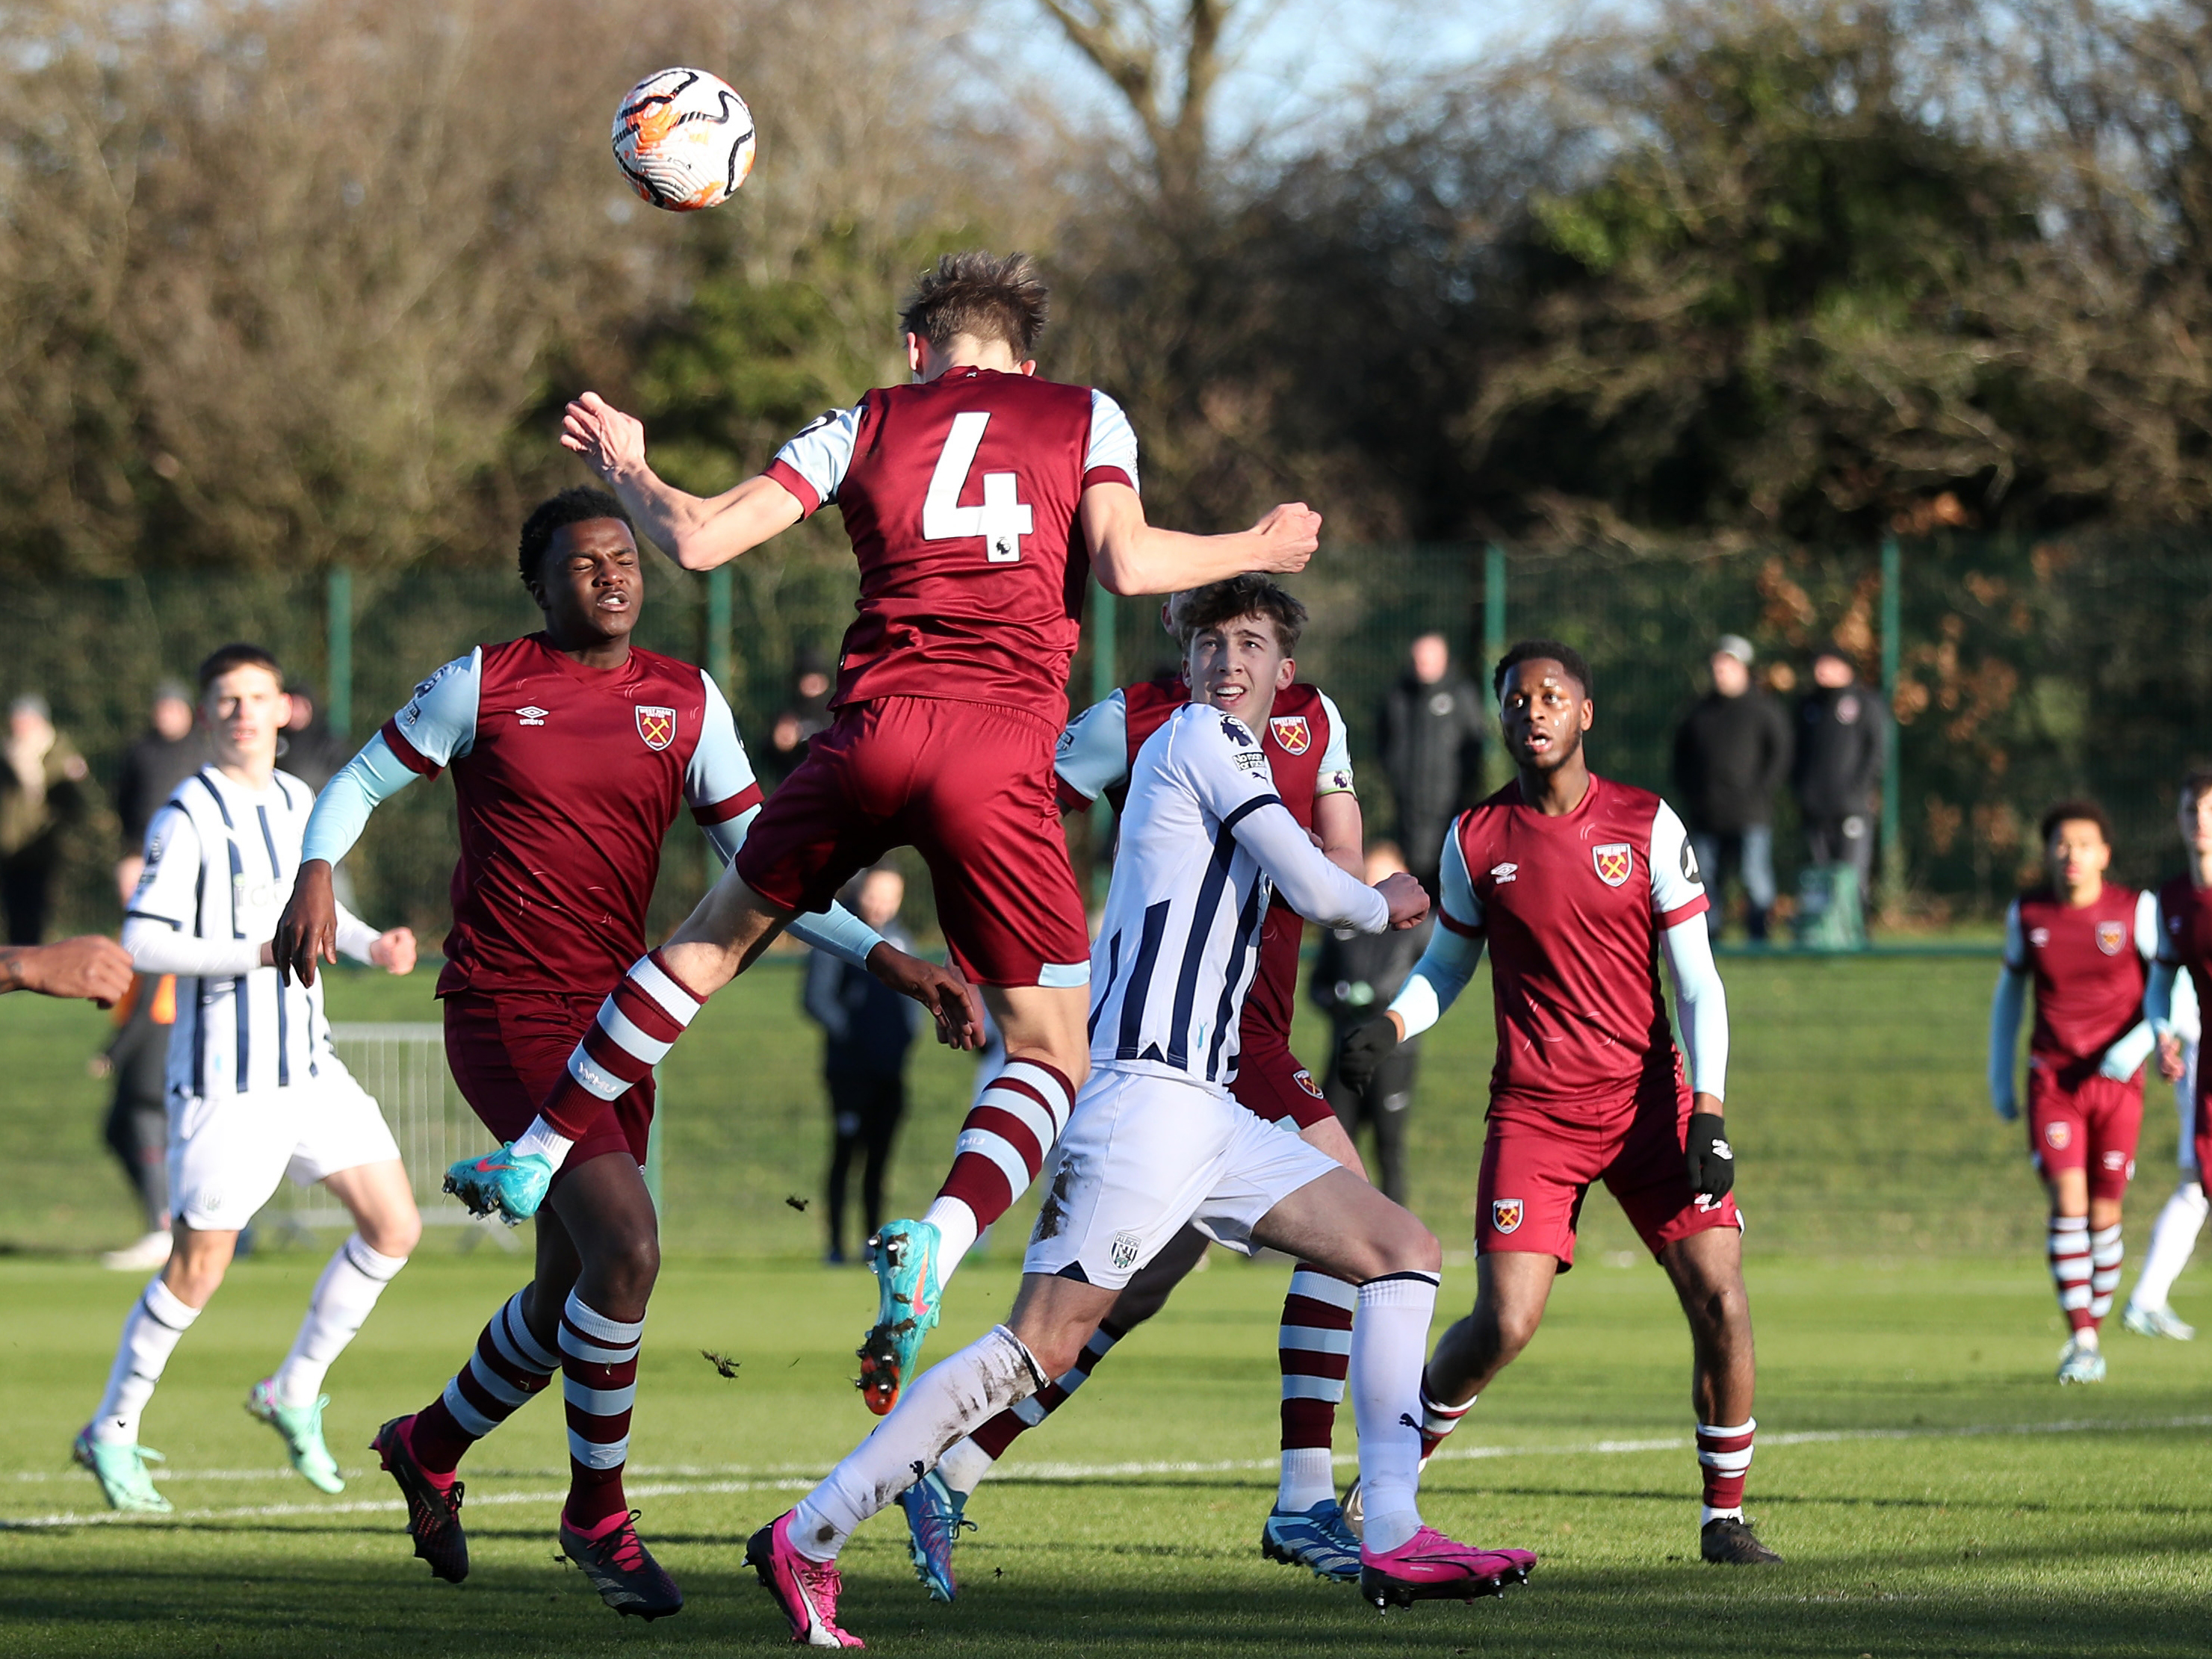 Albion players and West Ham players jump for the ball in a PL2 clash